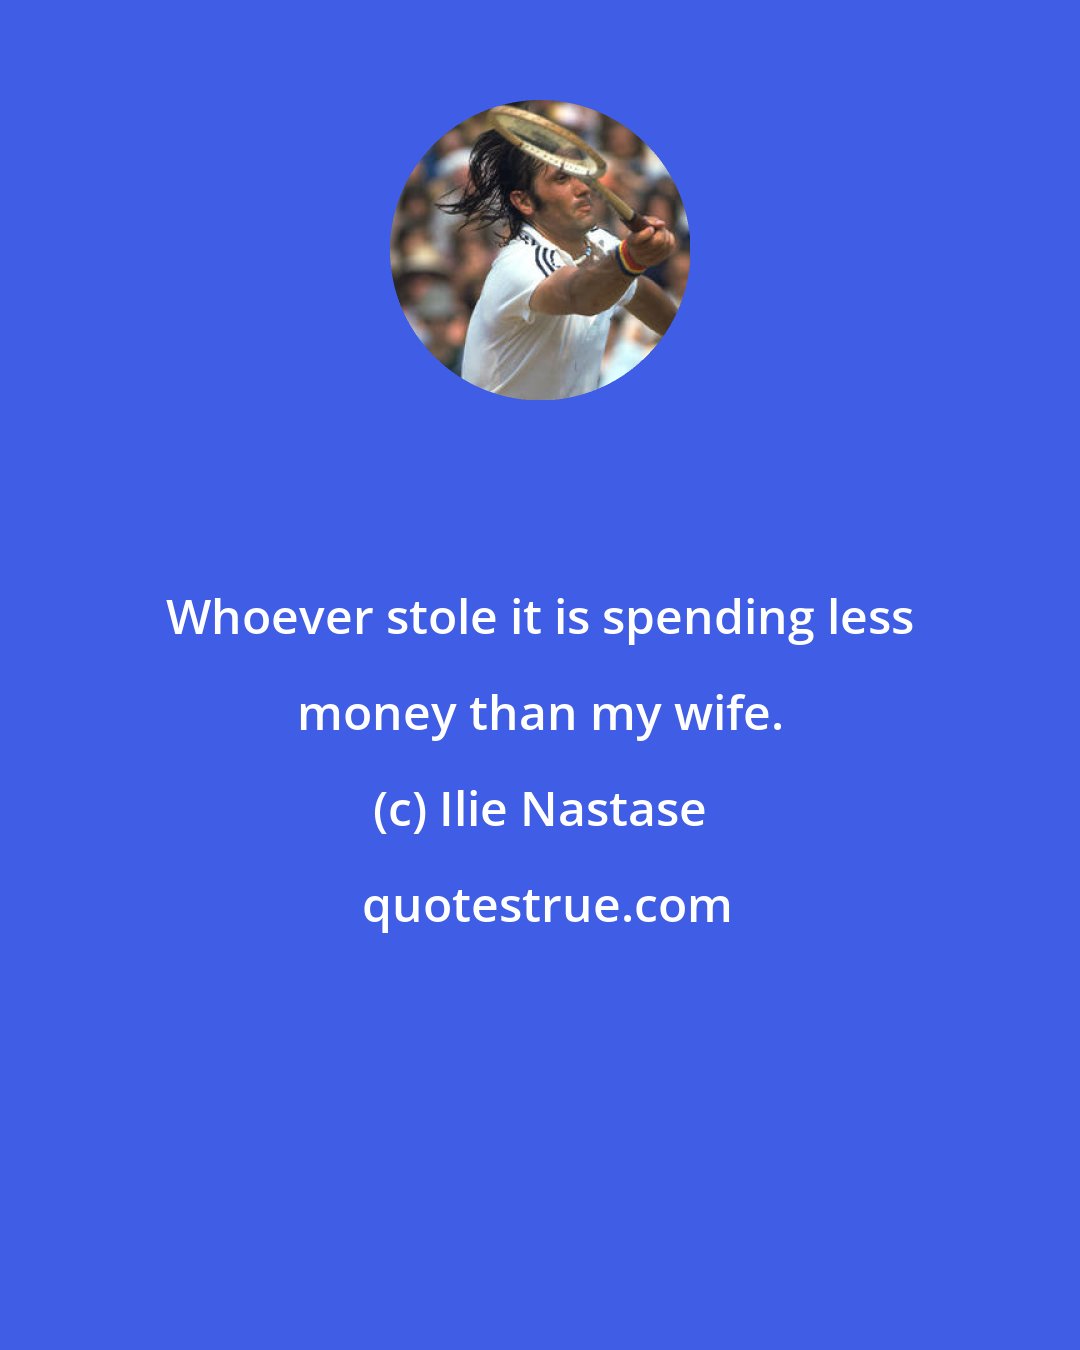 Ilie Nastase: Whoever stole it is spending less money than my wife.